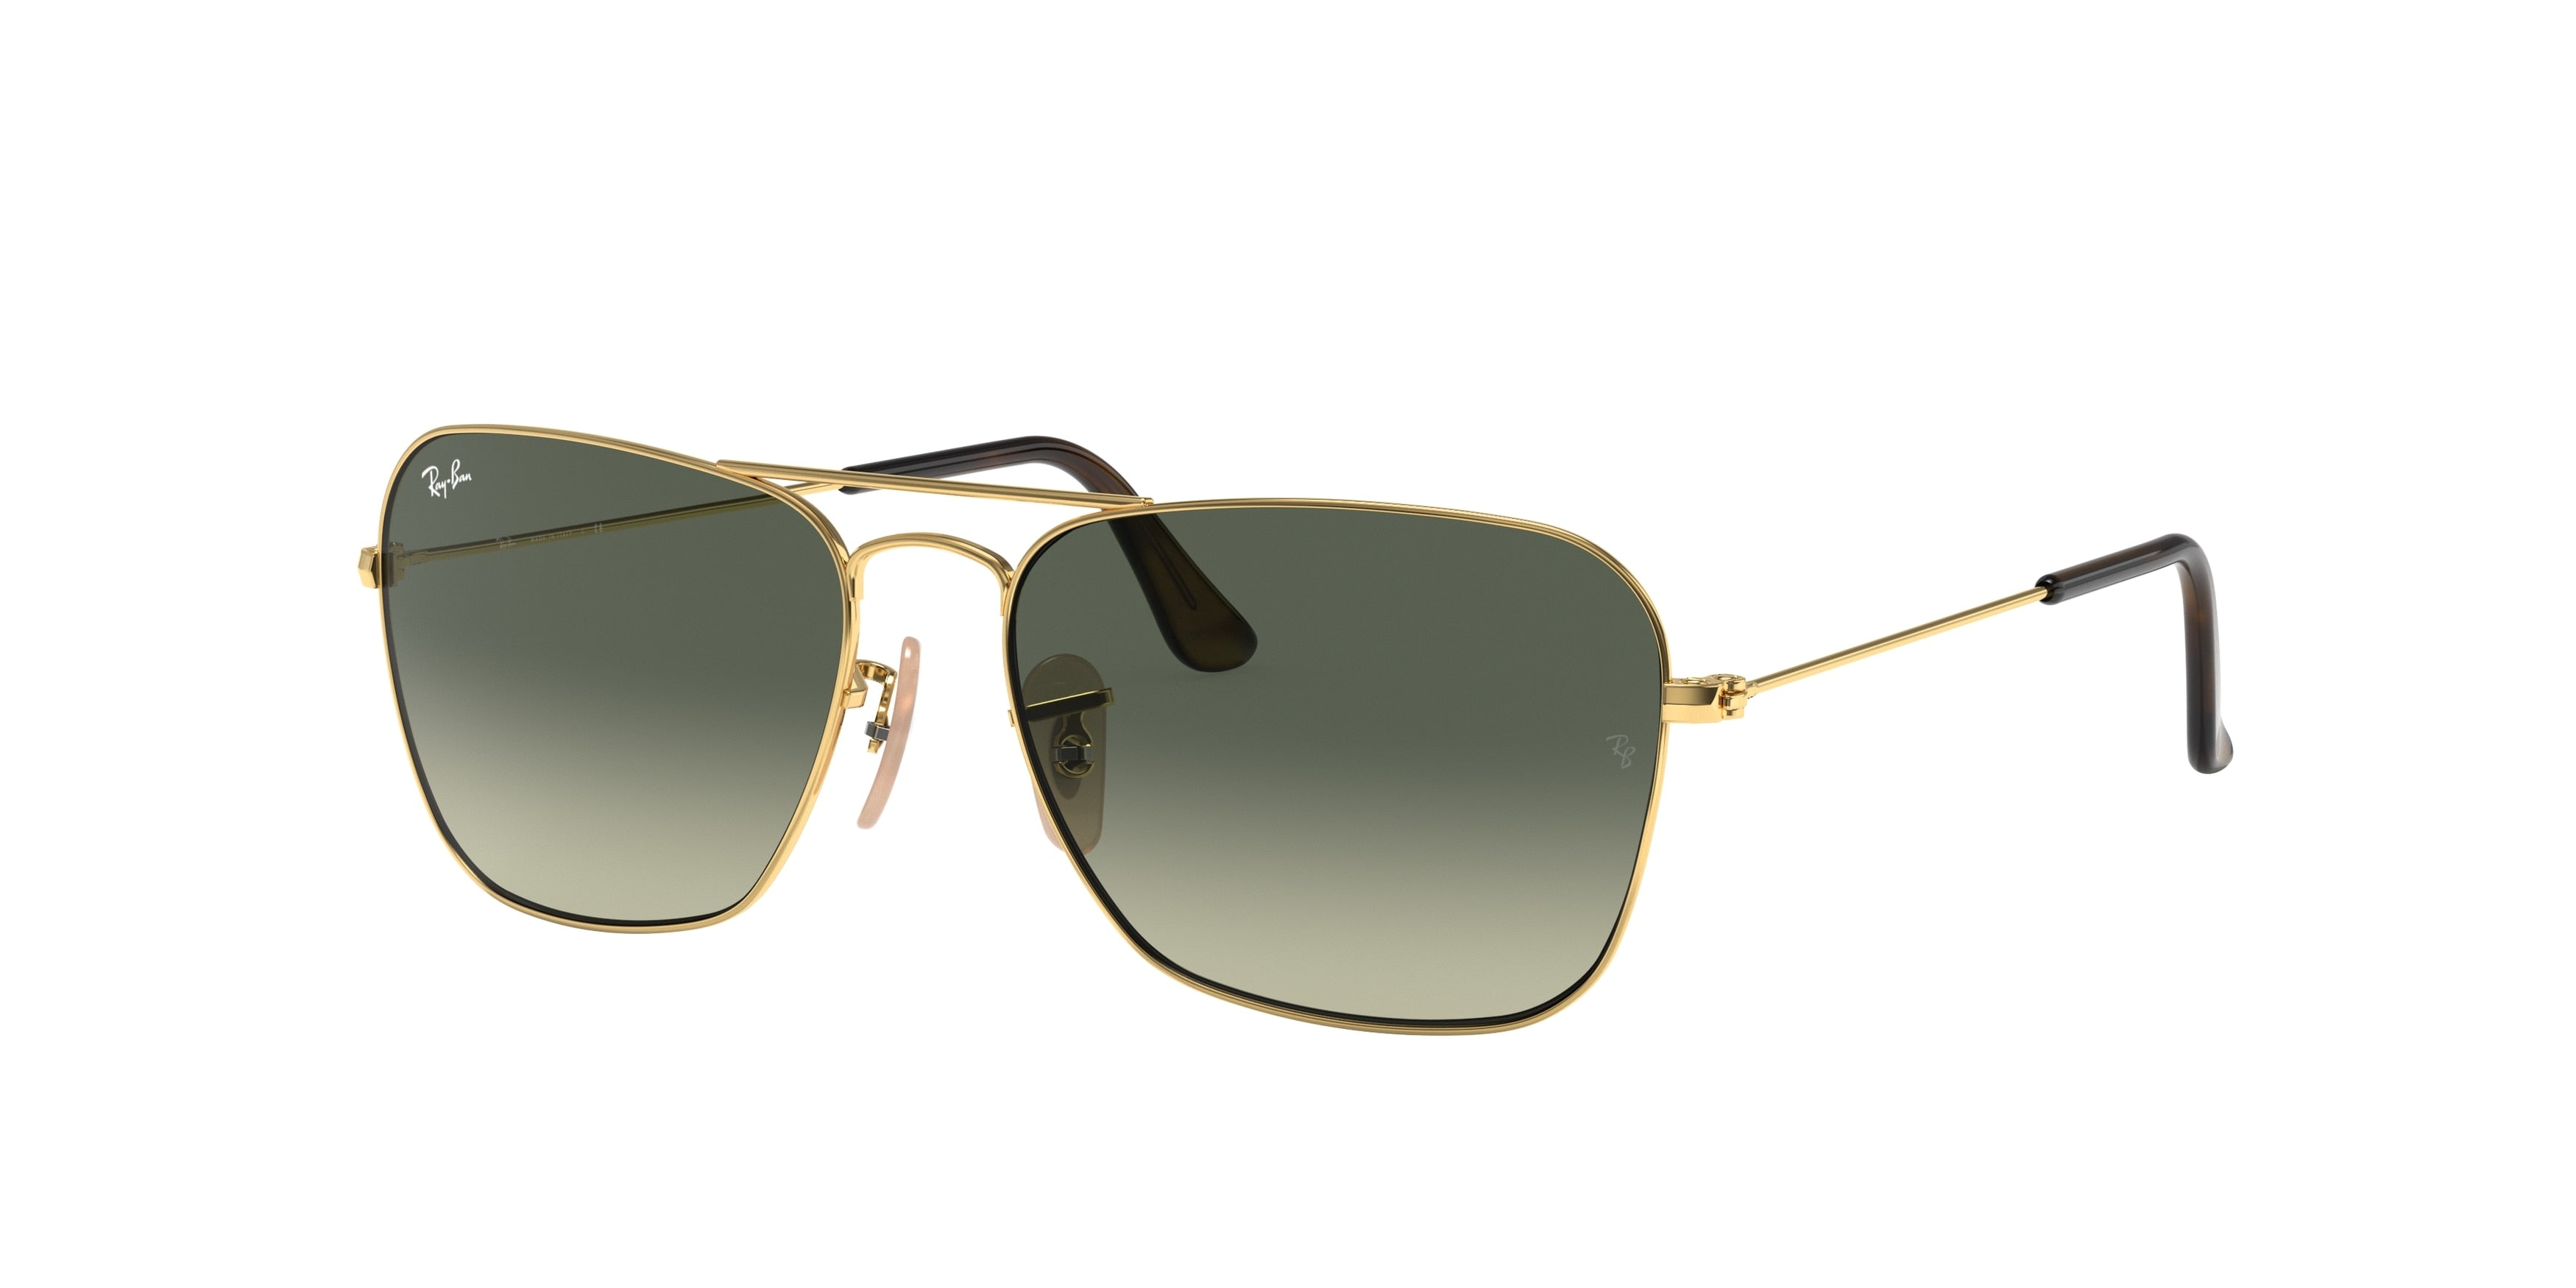 Ray-Ban CARAVAN RB3136 Square Sunglasses  181/71-Gold 57-140-15 - Color Map Gold